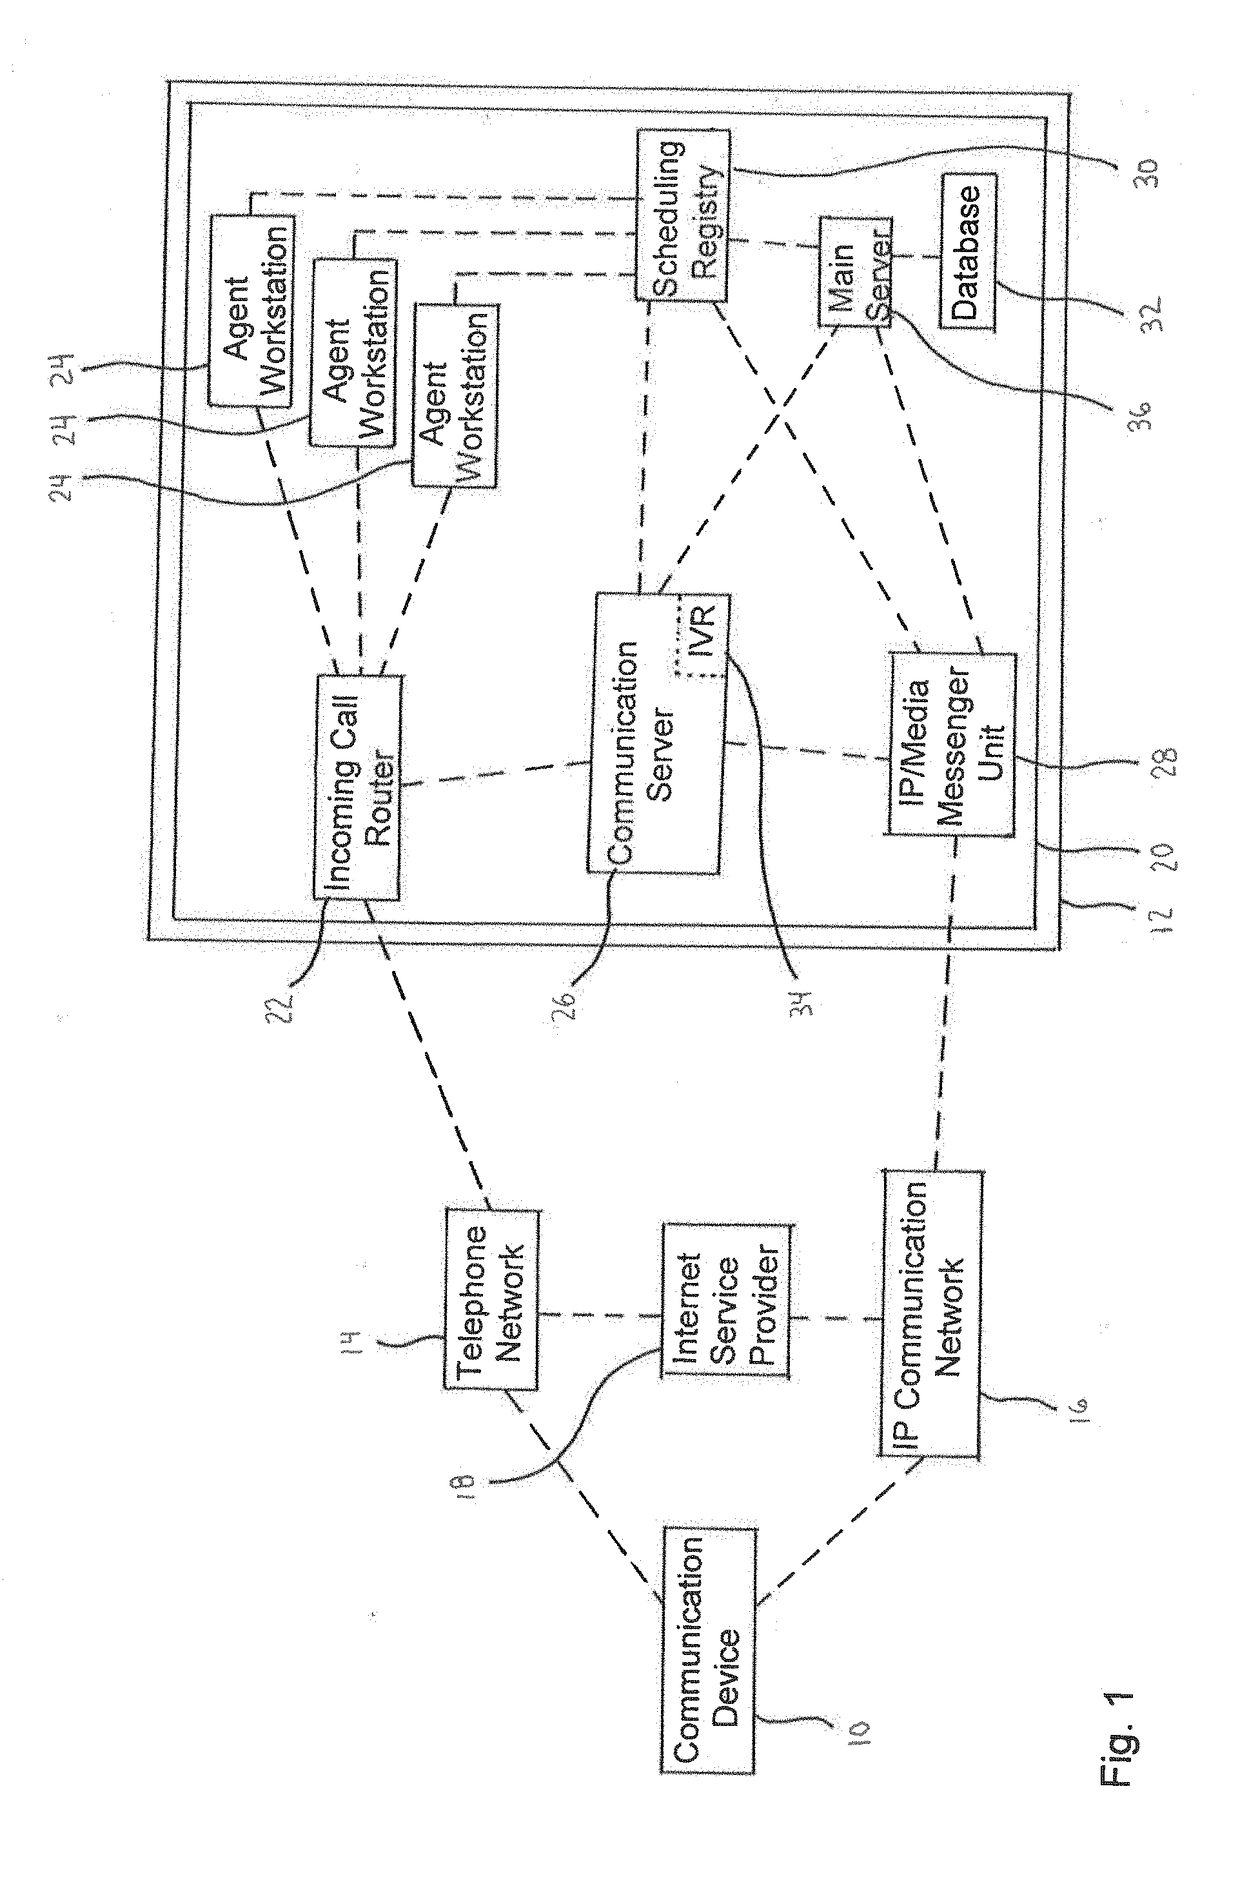 System and method for switching from a call on a voice communication channel to web based self-services